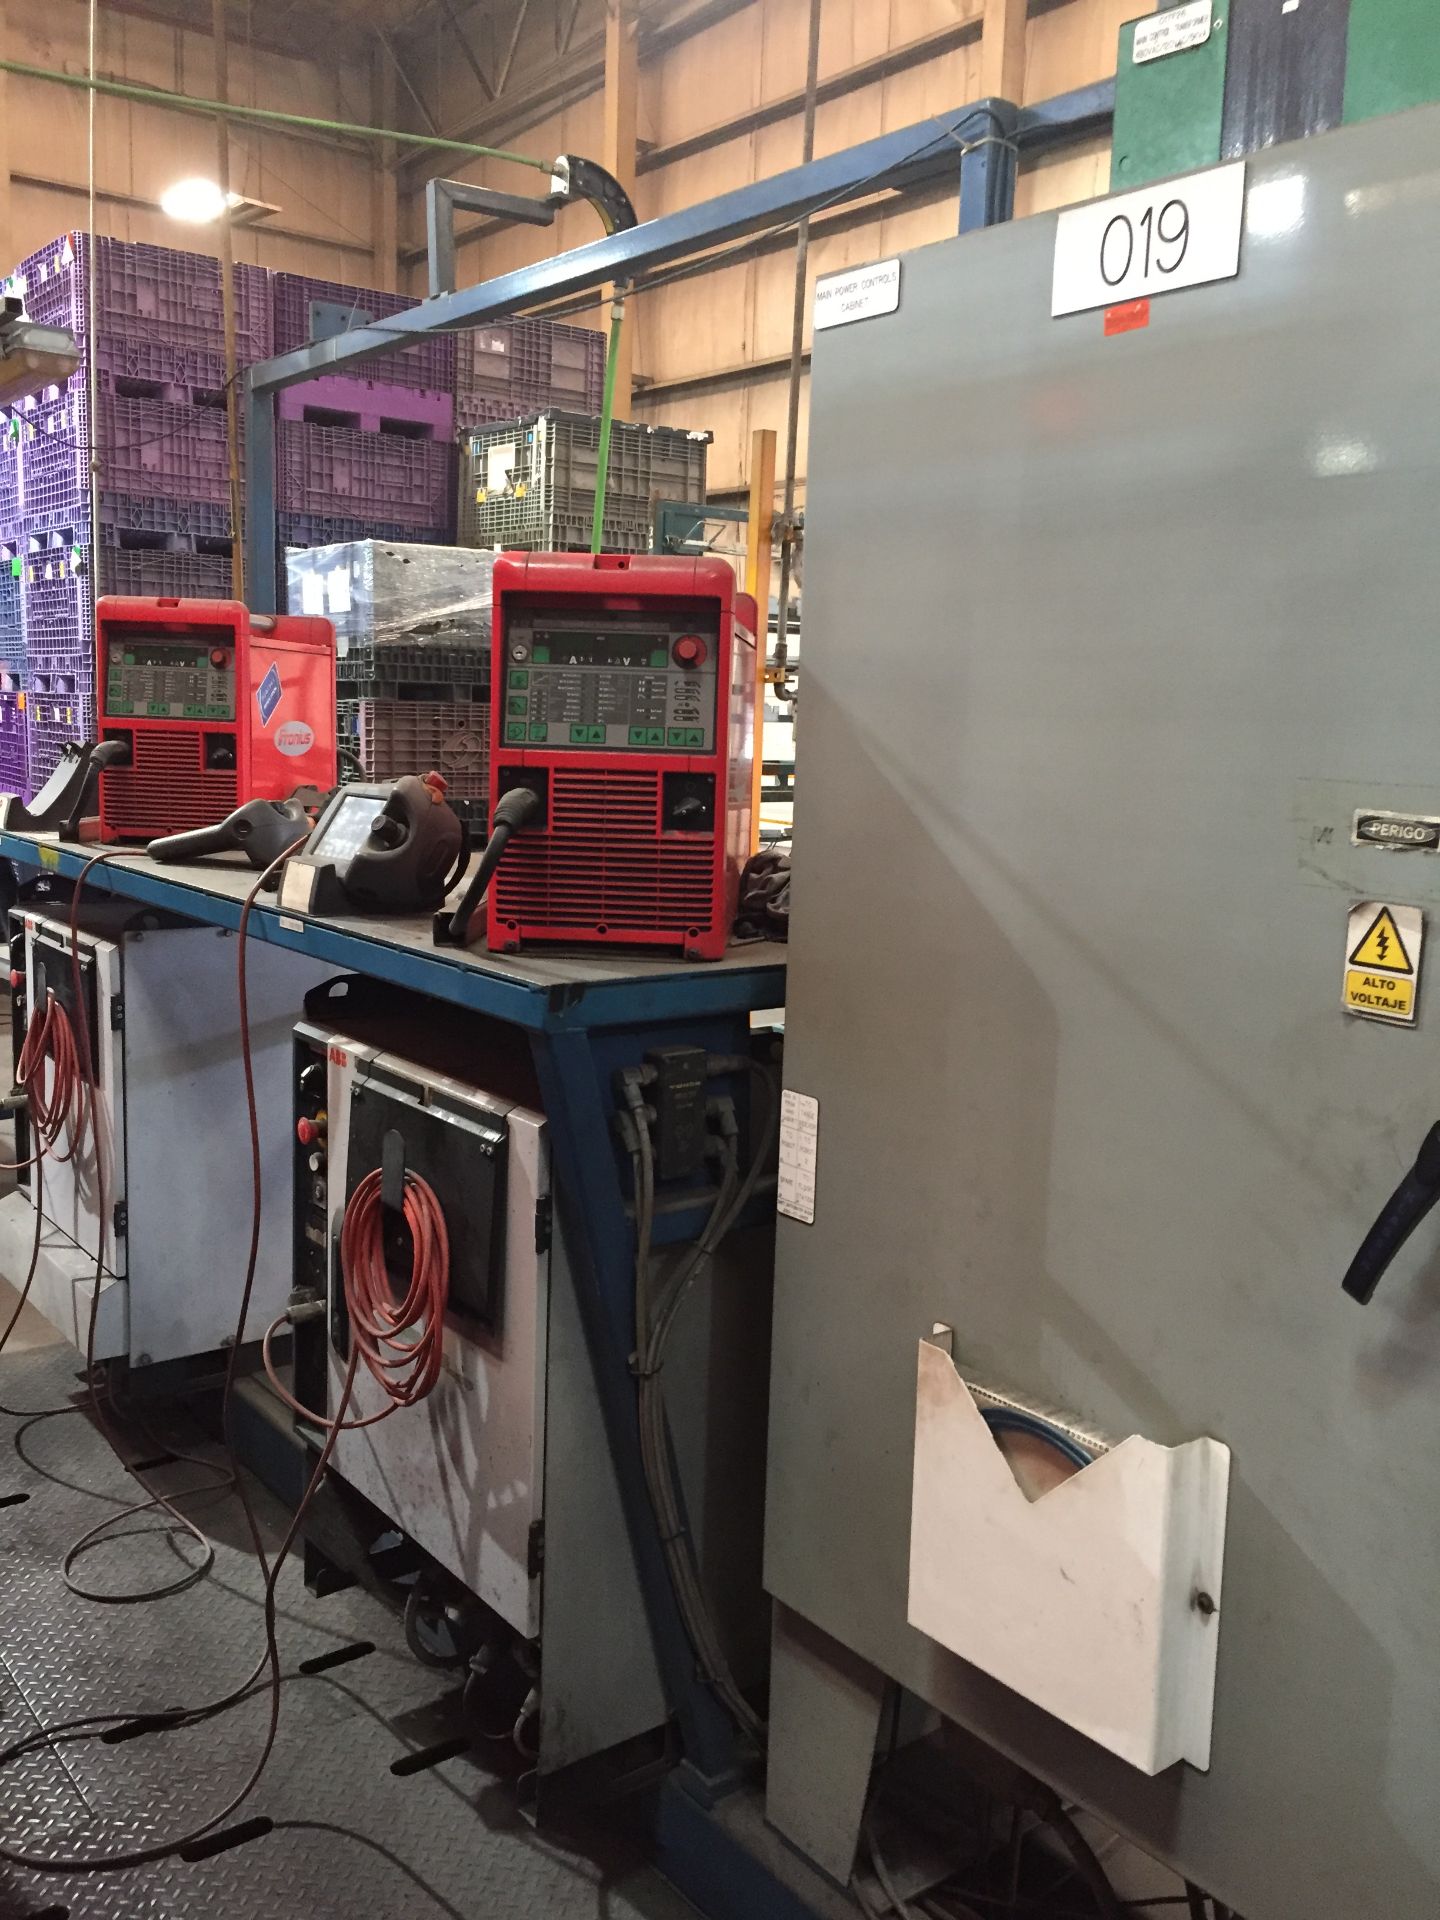 LOT/ CELL-19 ABB-FRONIUS ROBOTIC WELDING CELL CONSISTING OF (2) ABB IRB-1600 WELDING ROBOTS WITH ABB